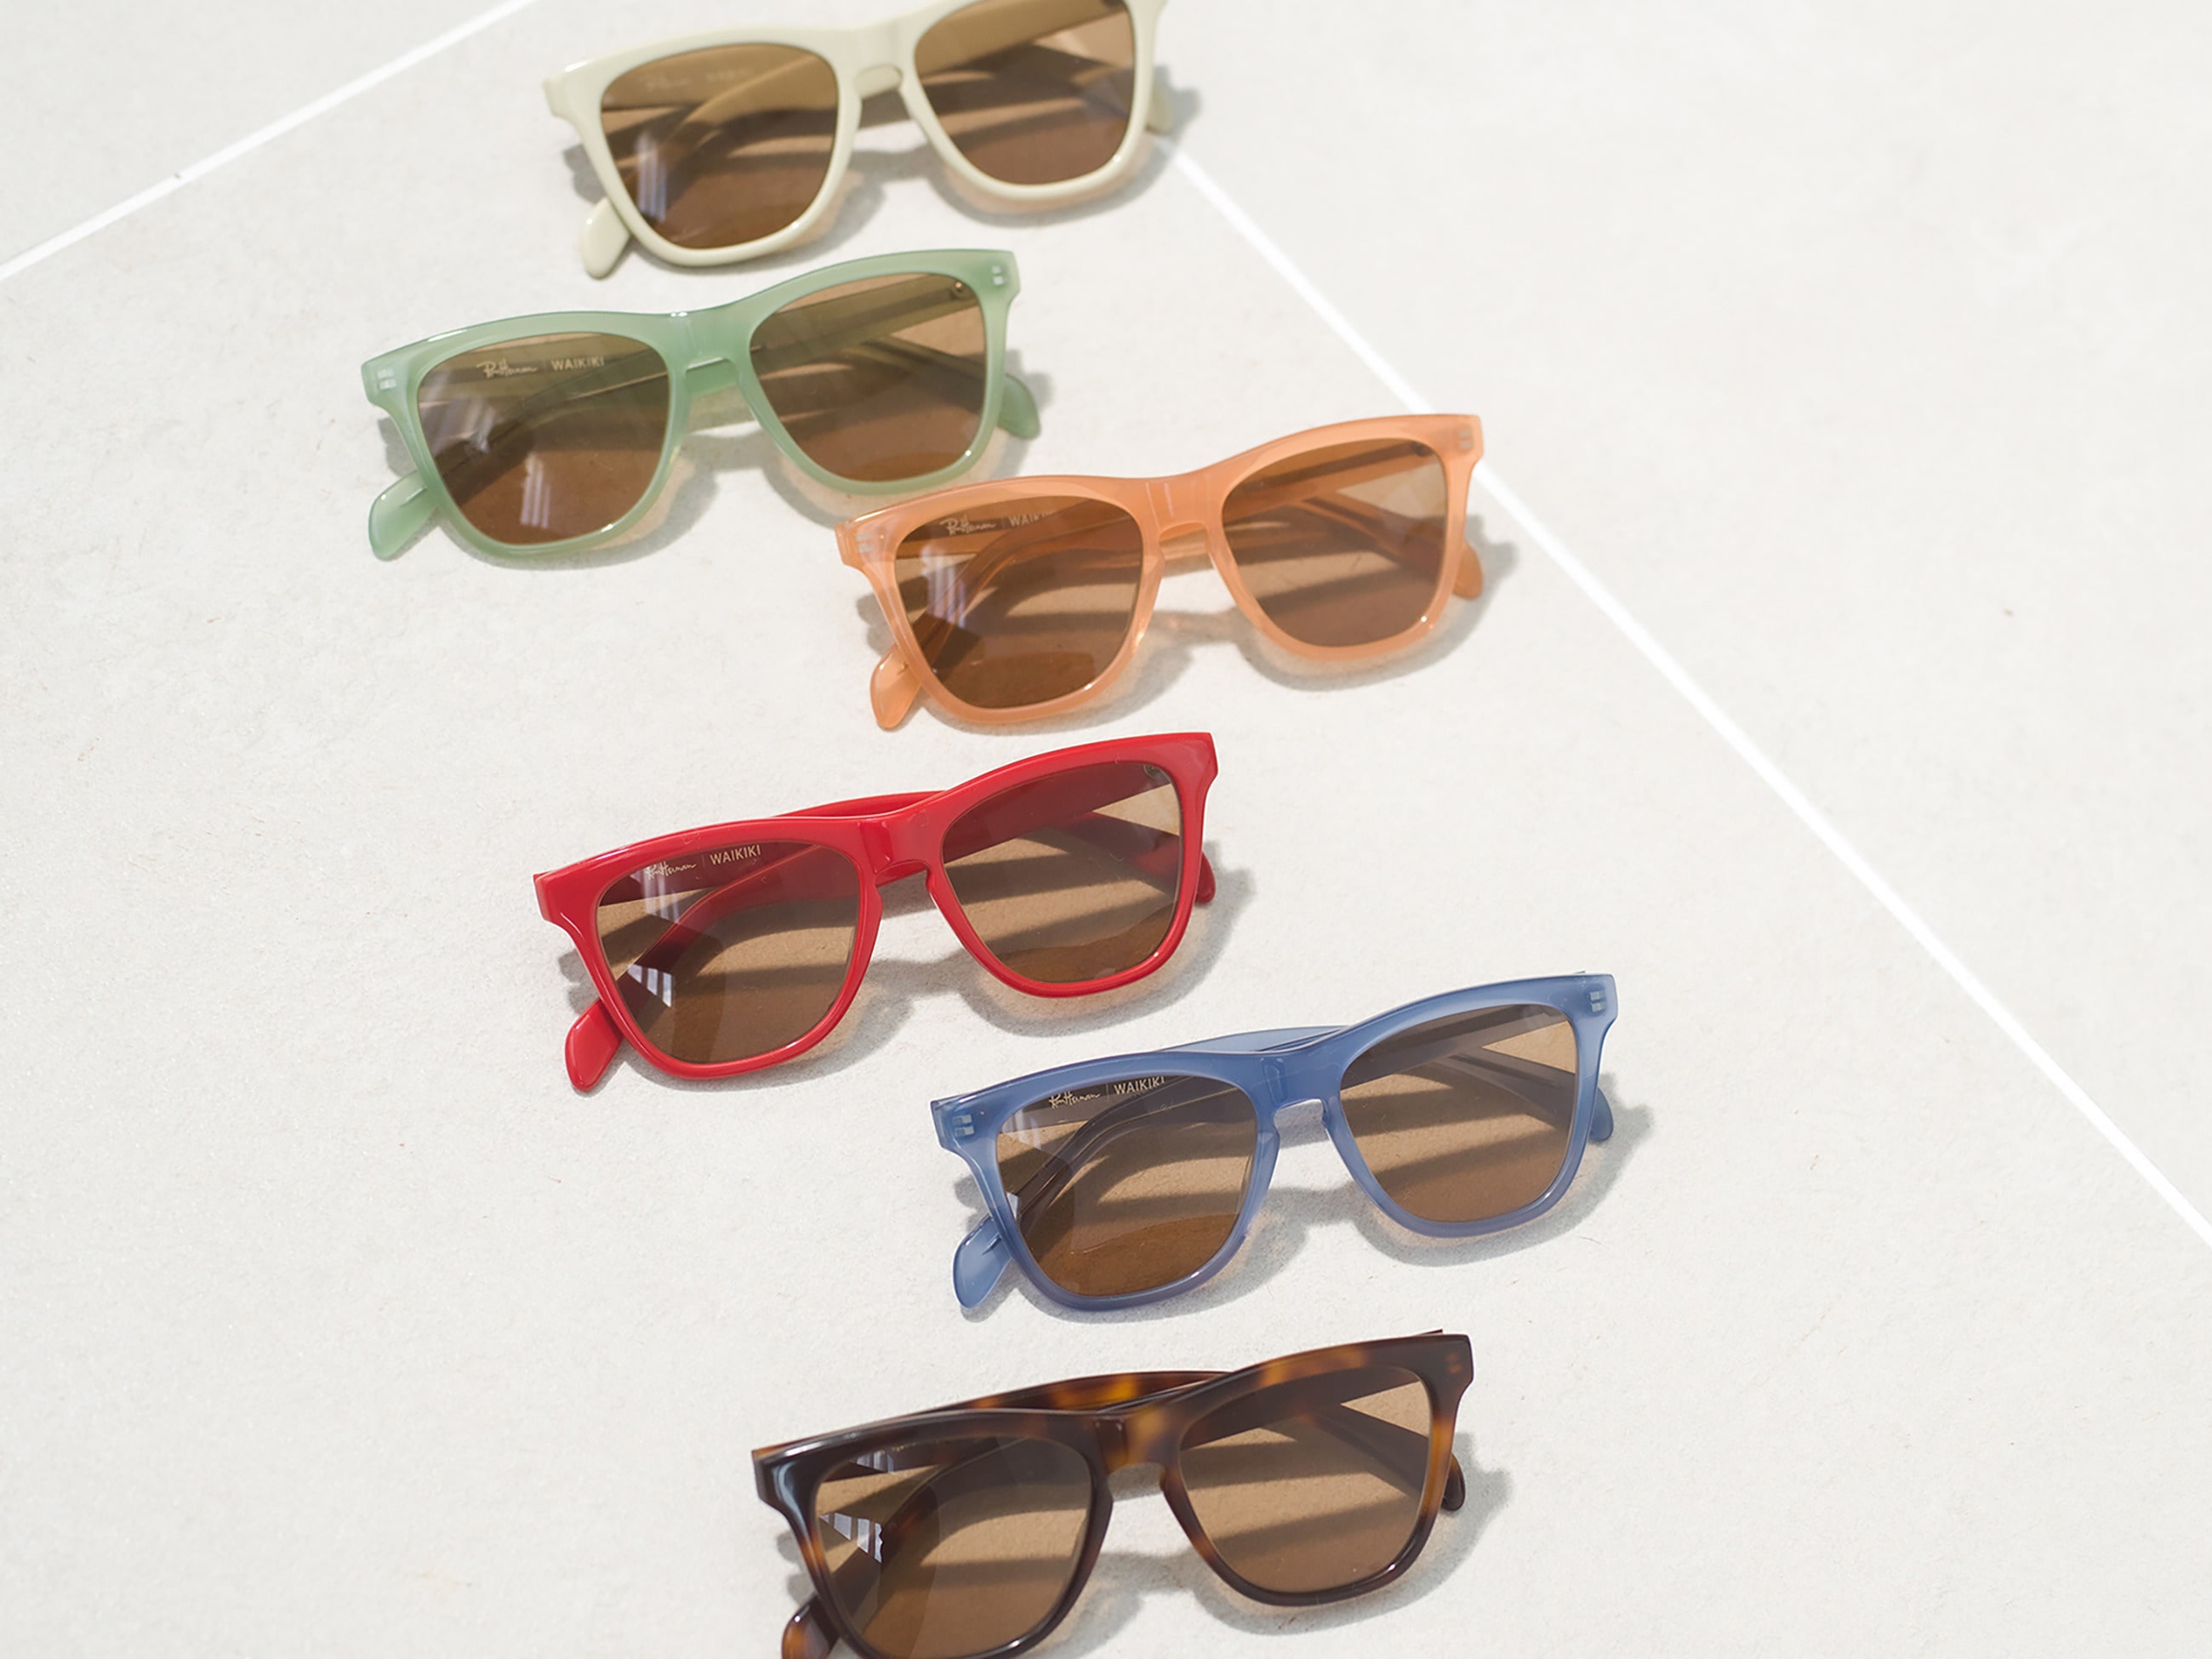 TOM FORD EYEWEAR Exclusive for Ron Herman New Arrival News｜Ron Herman